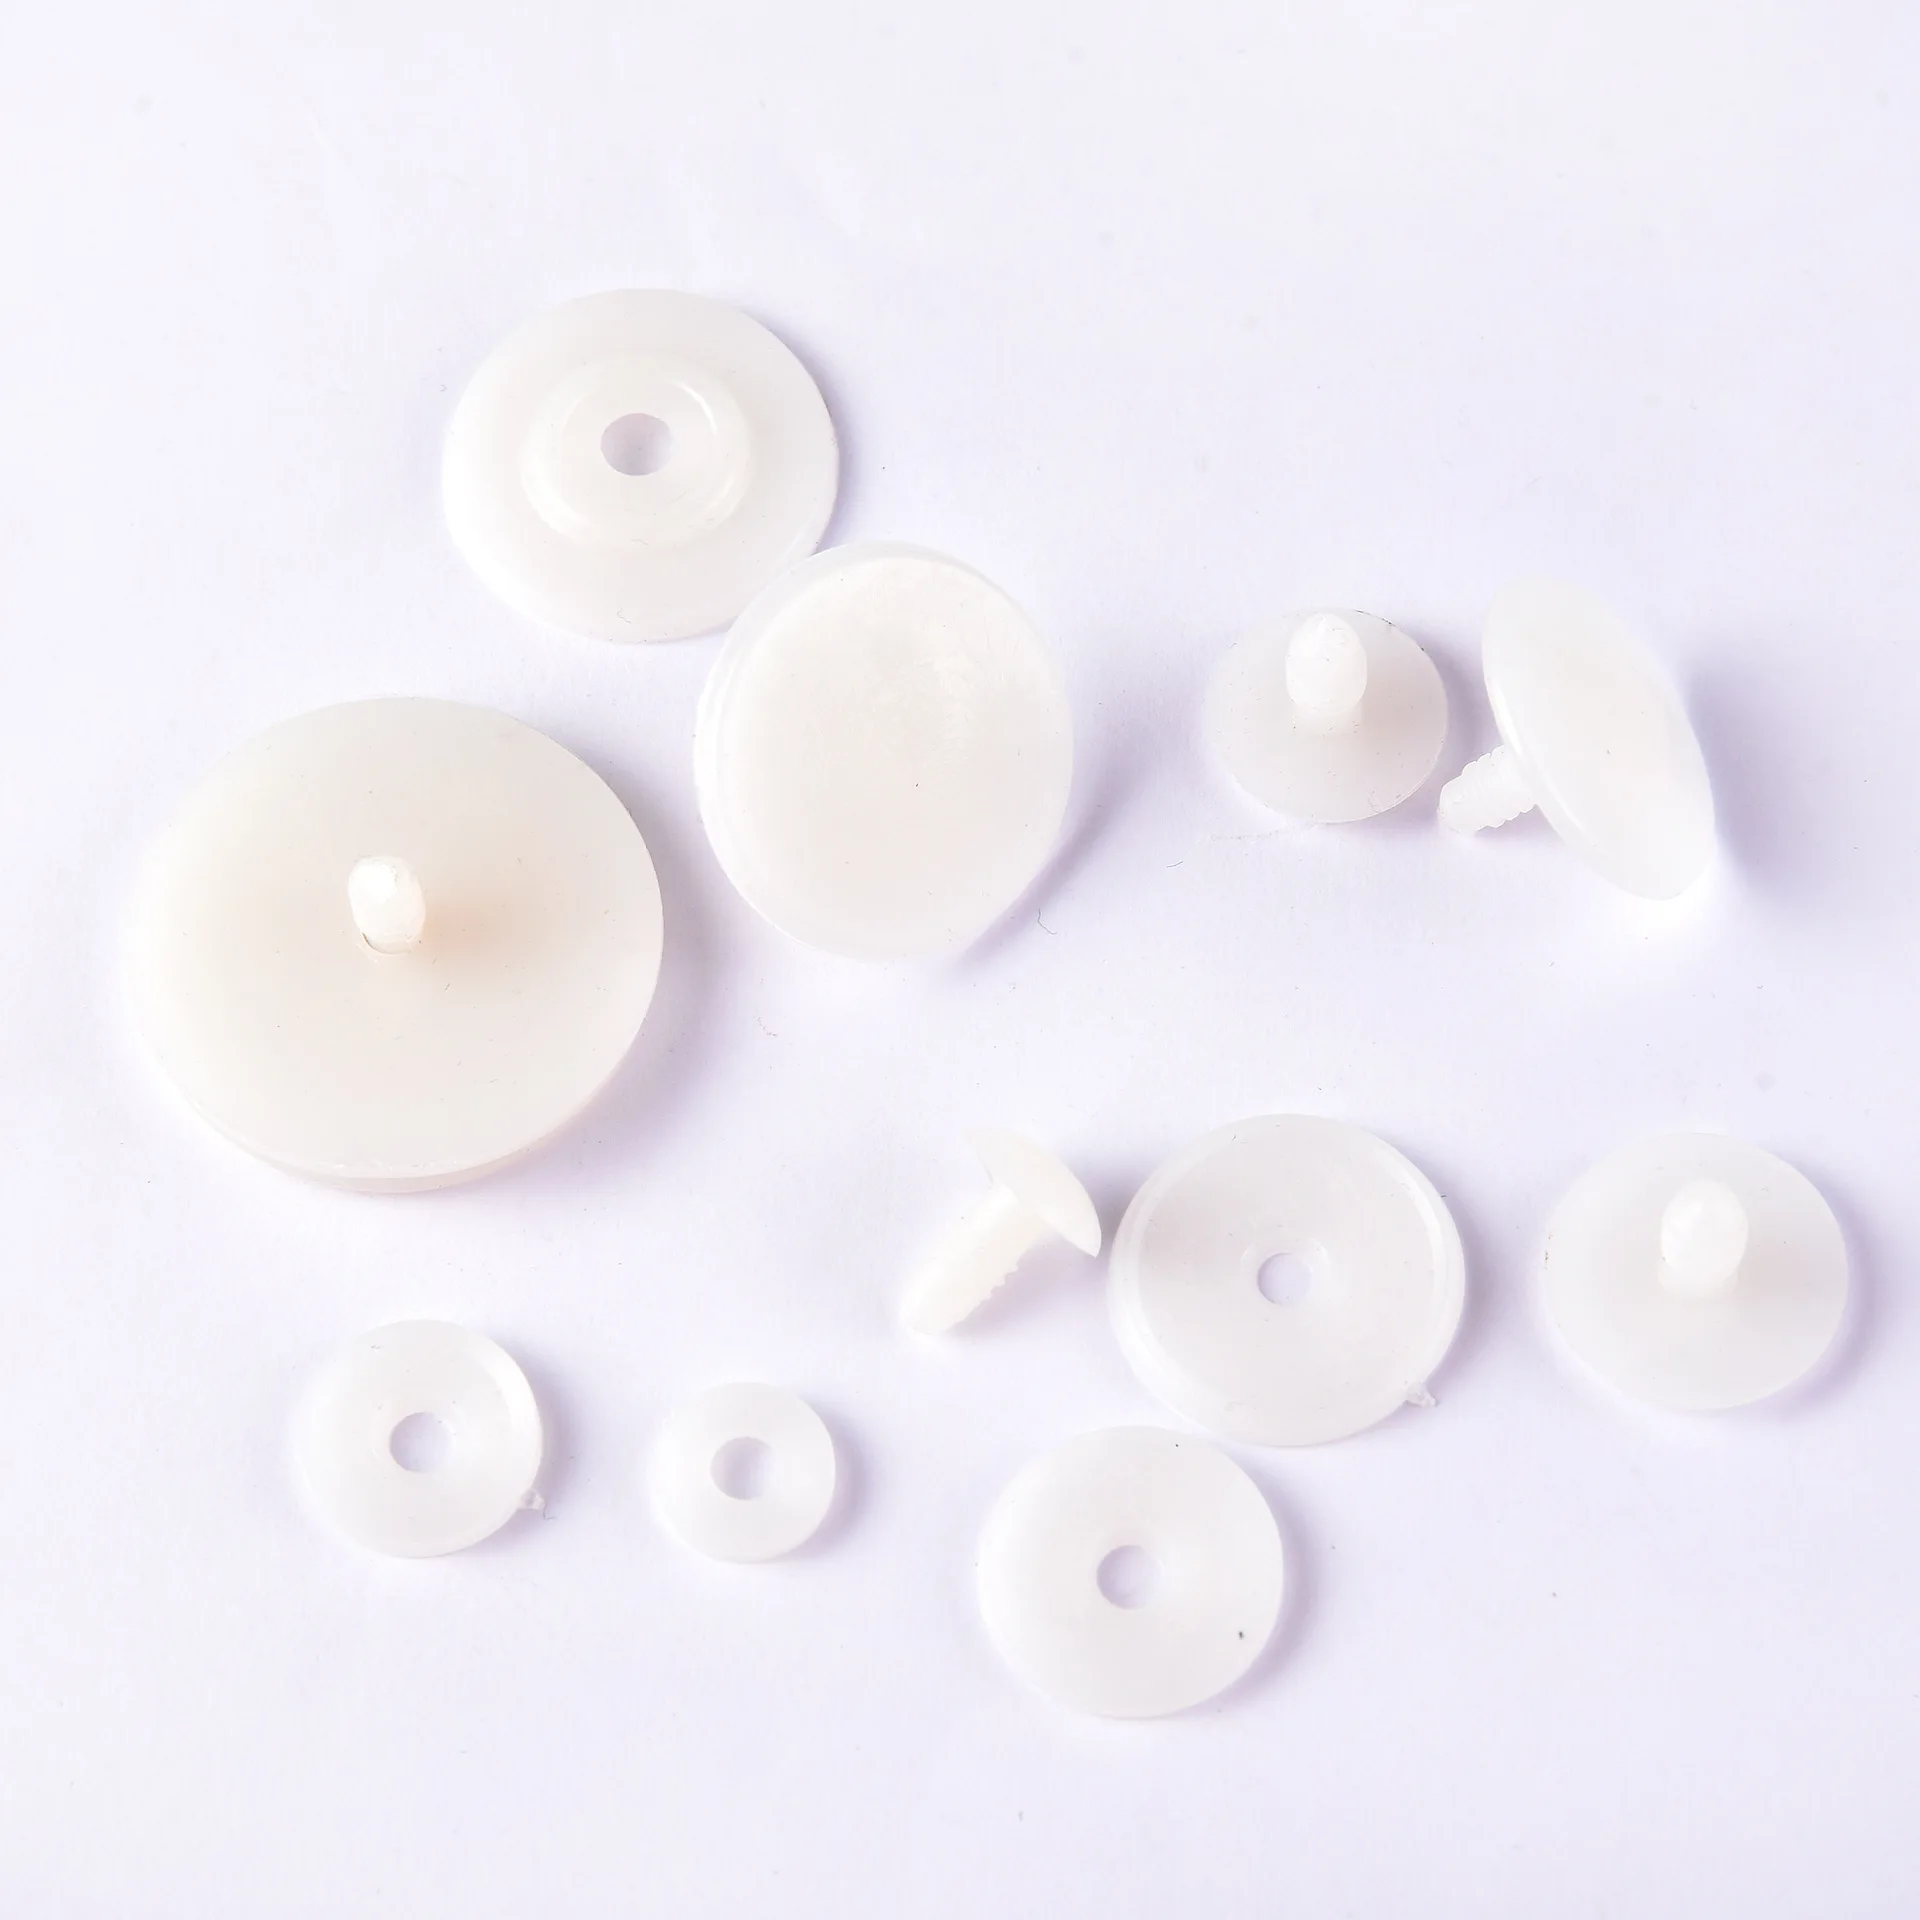 Doll 55mm White Plastic Safety Joints for Teddy Toys x 10 or 25 joints EN71 